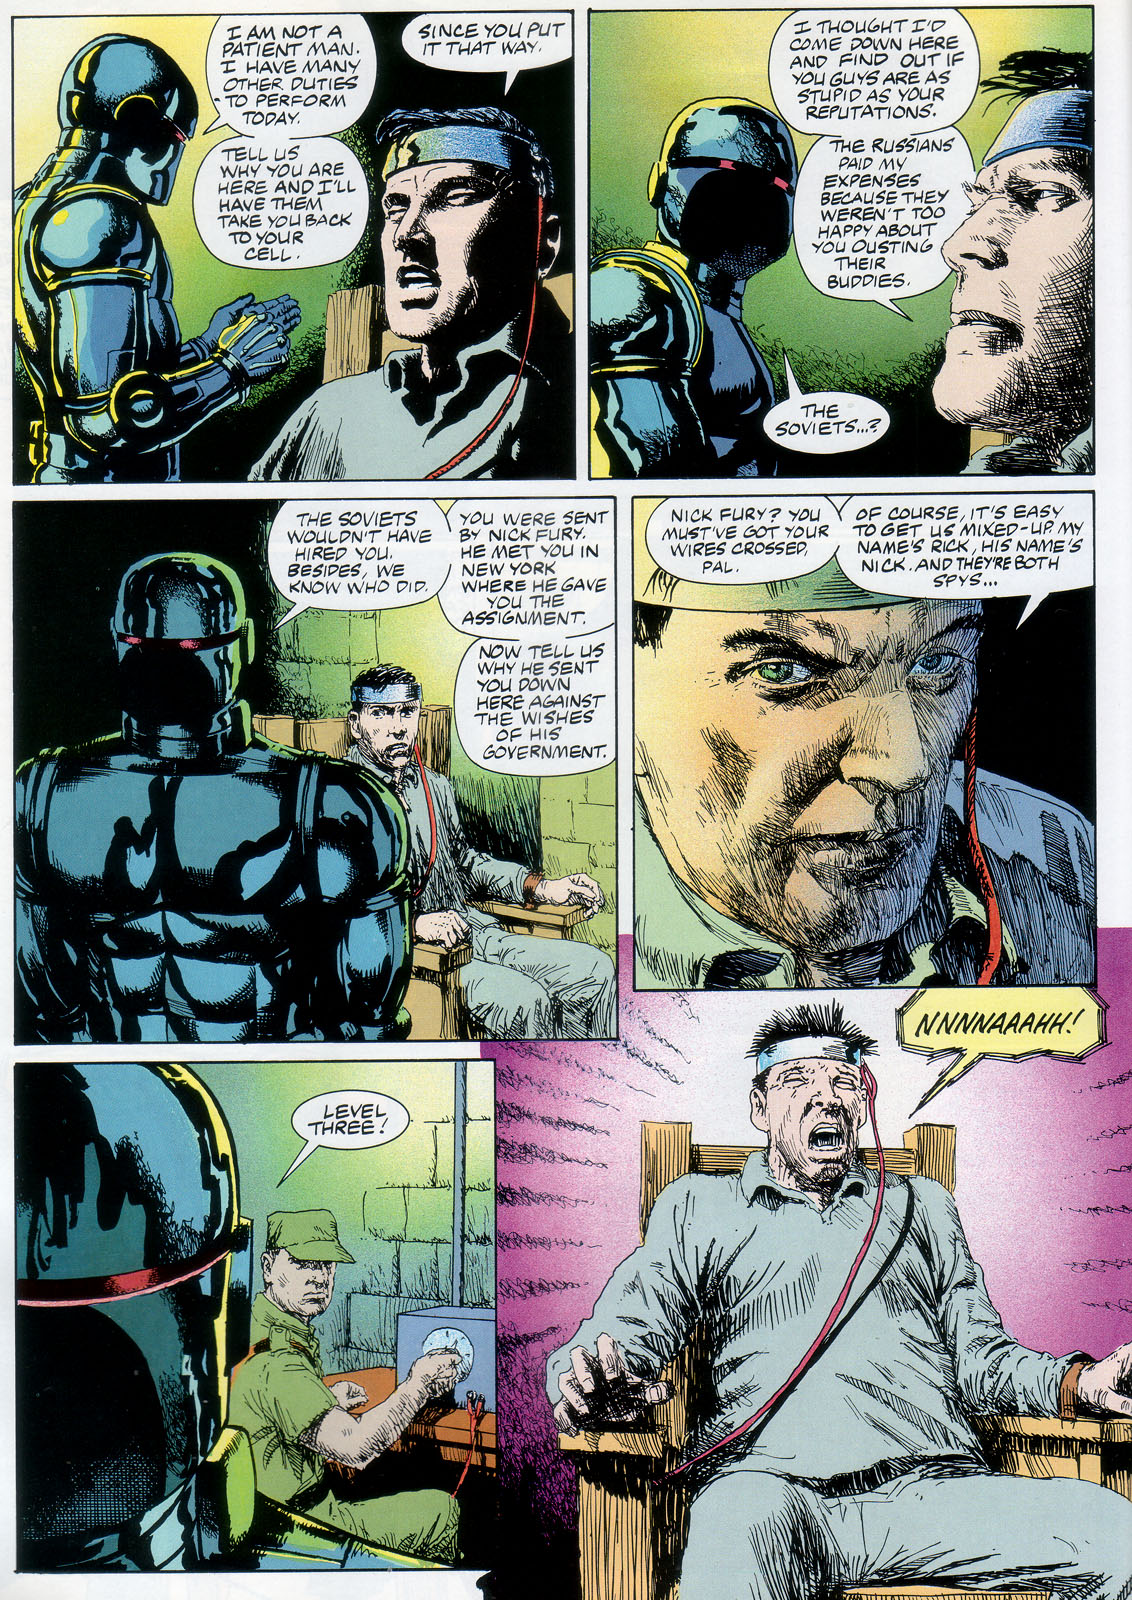 Marvel Graphic Novel issue 57 - Rick Mason - The Agent - Page 60